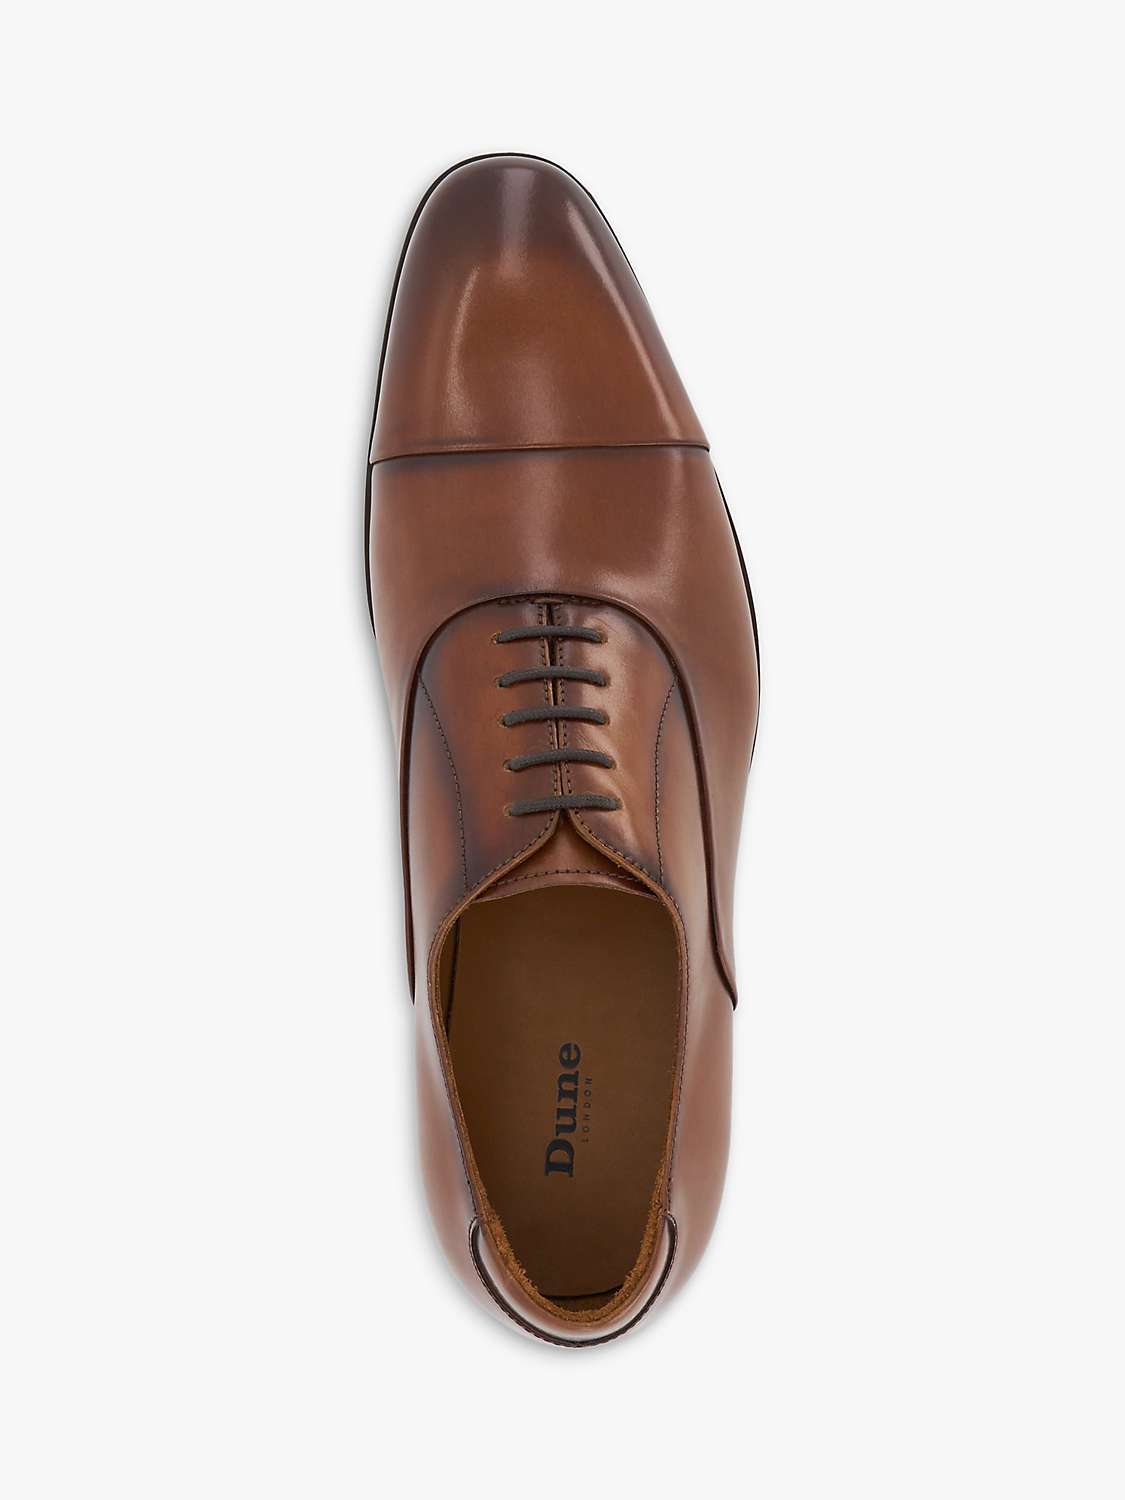 Buy Dune Secrecy Leather Oxford Shoes, Dark Tan-leather Online at johnlewis.com